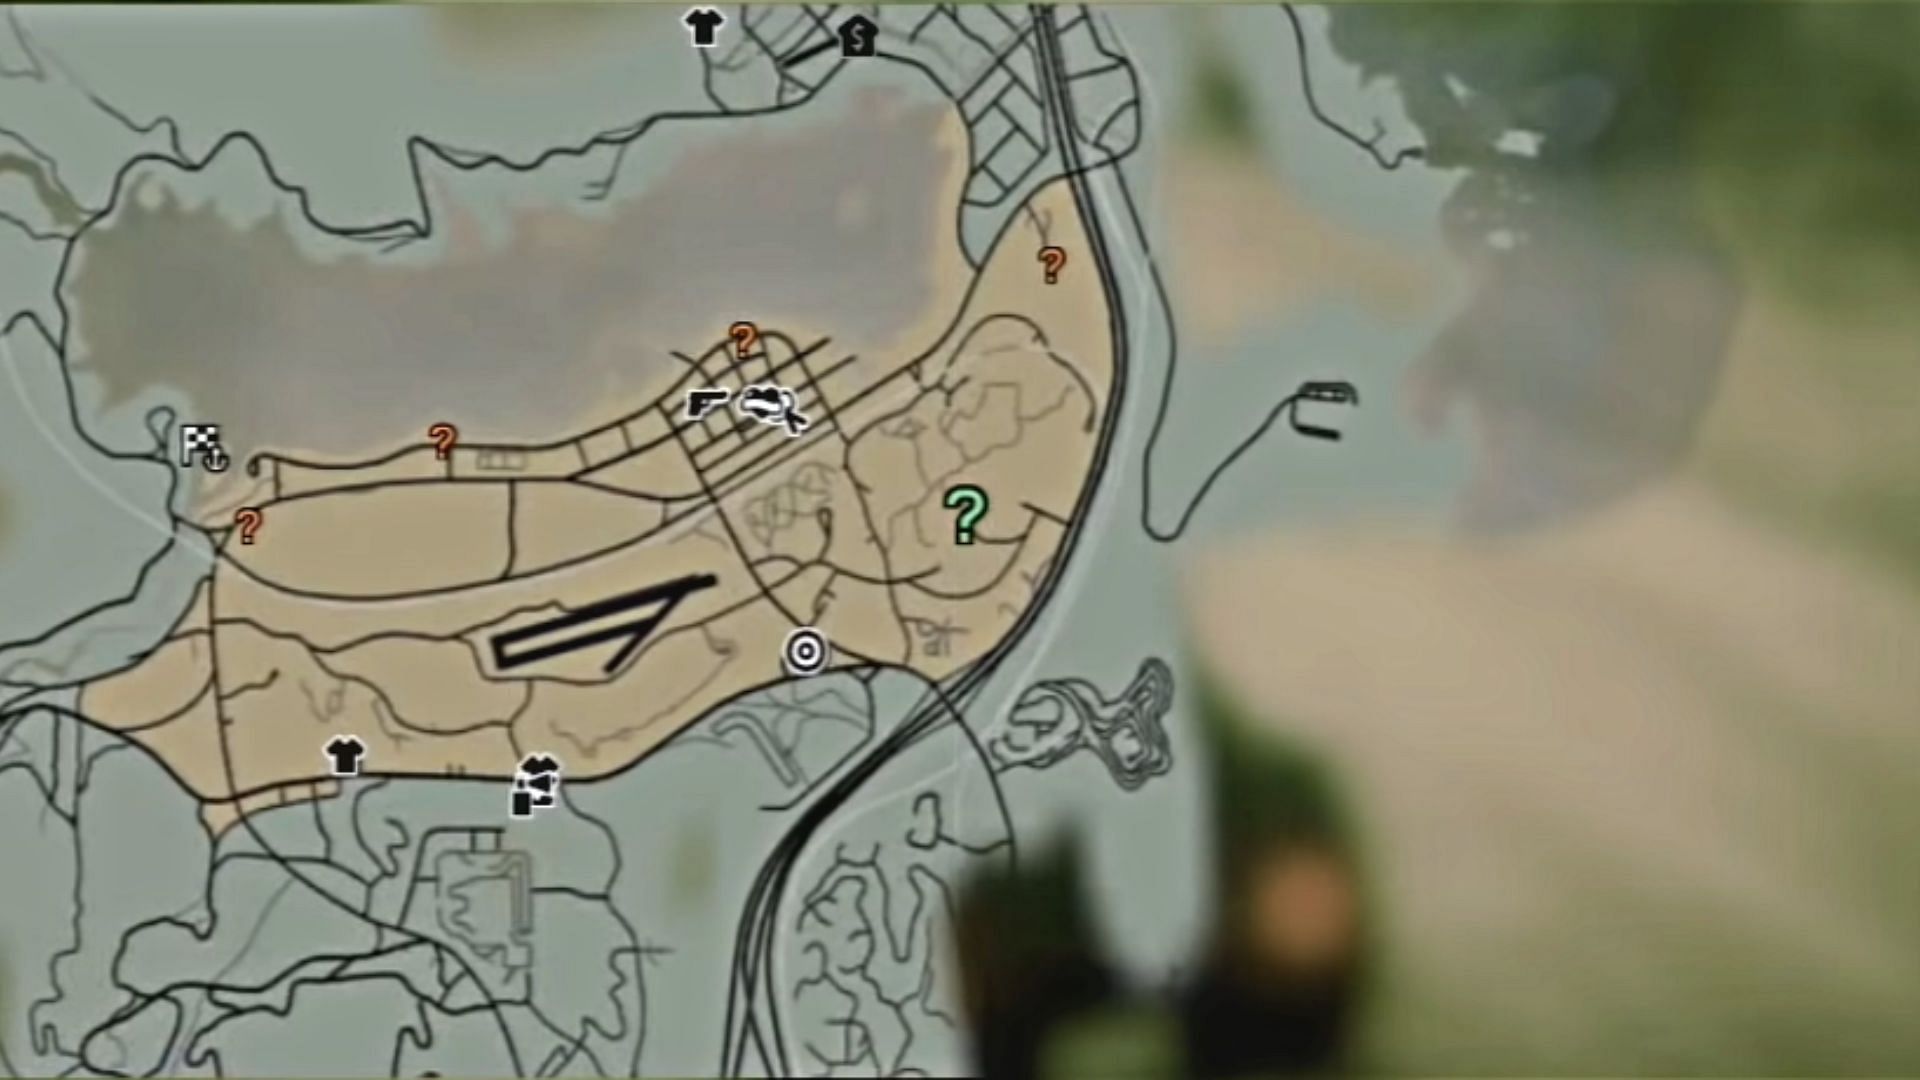 Omega&#039;s location in Sandy Shores (Image via YouTube @Typical Gamer)